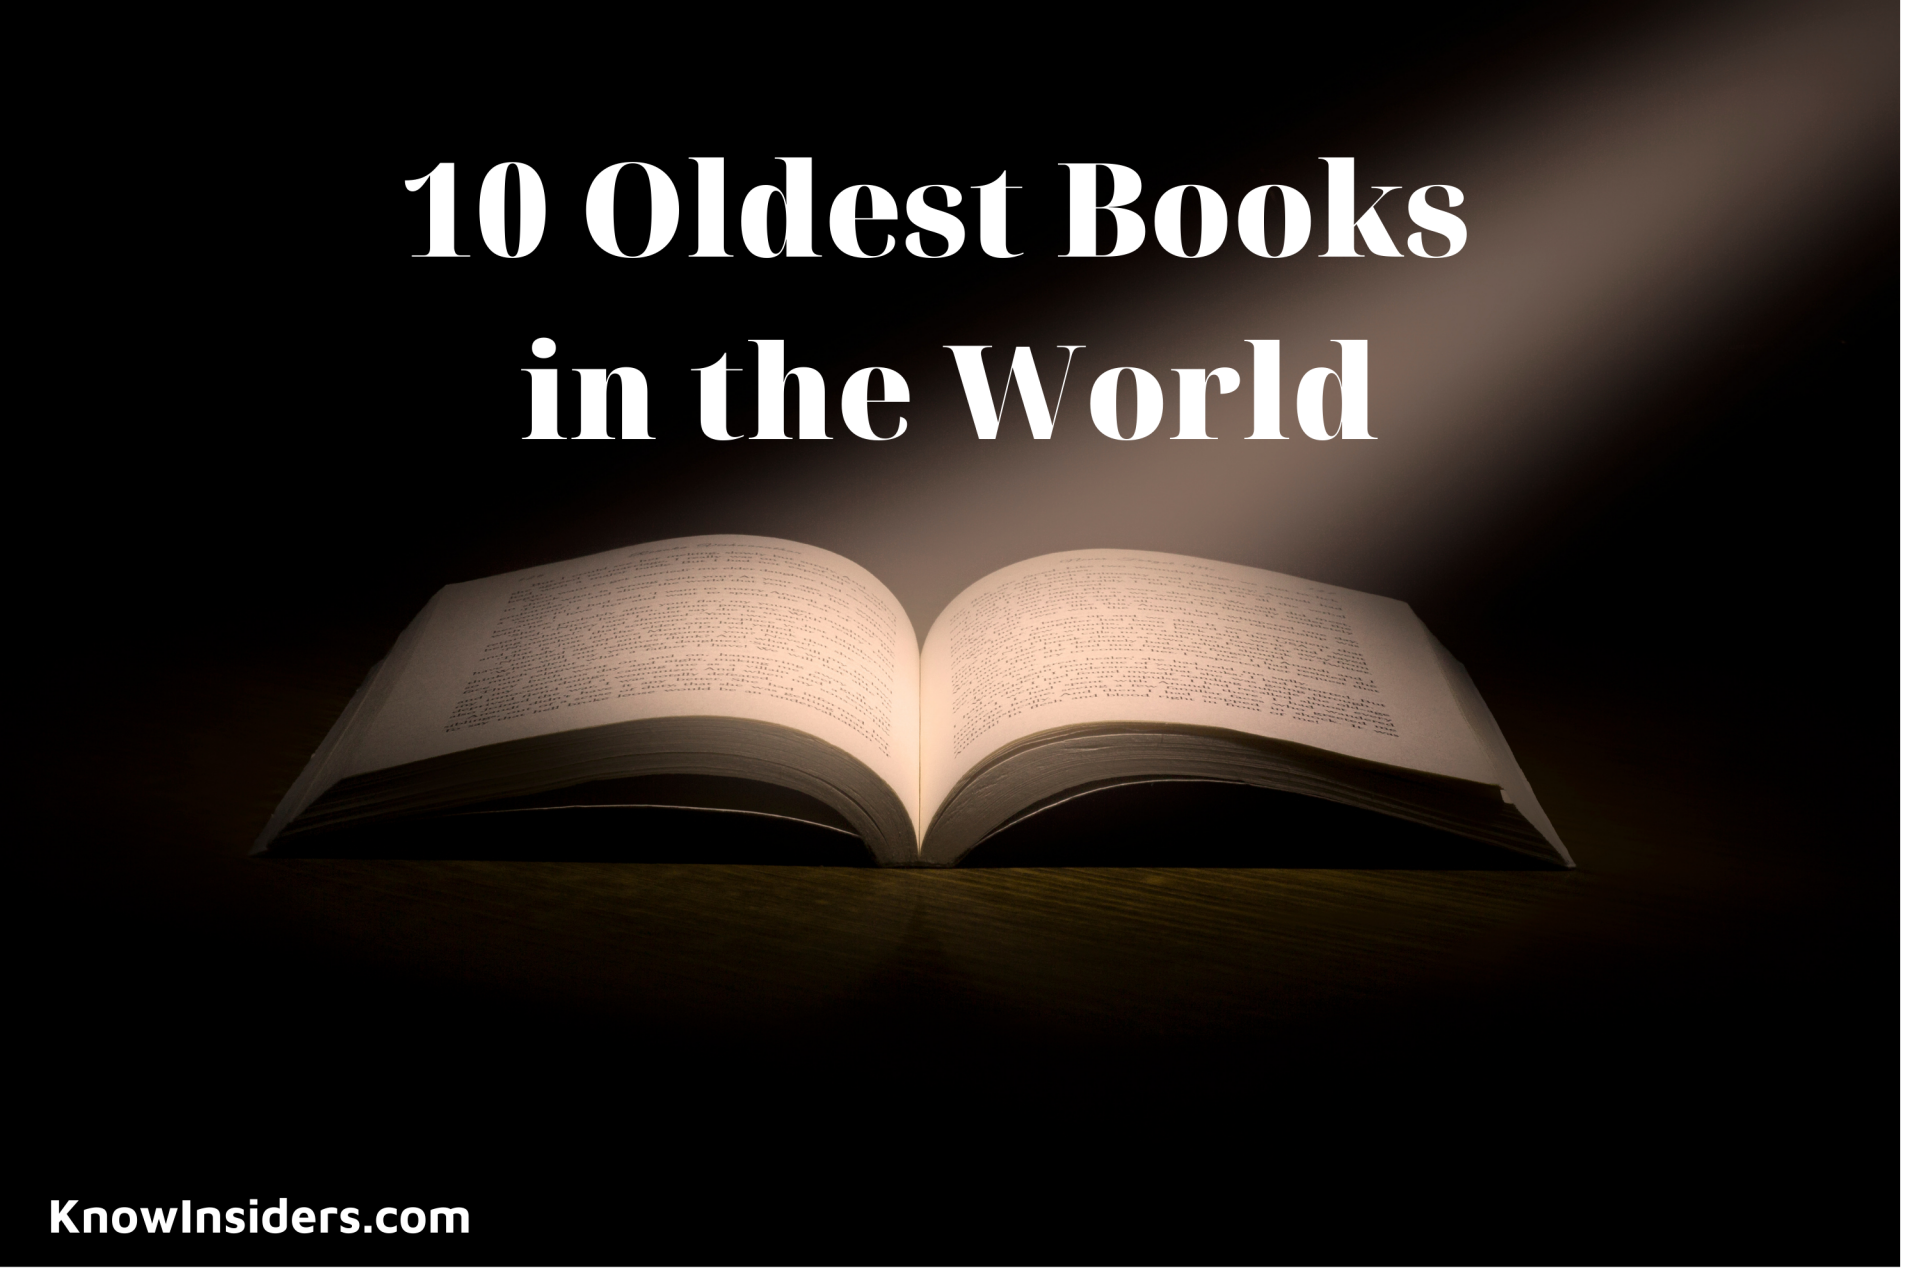 What Are The Oldest Books (Top 10) in the World